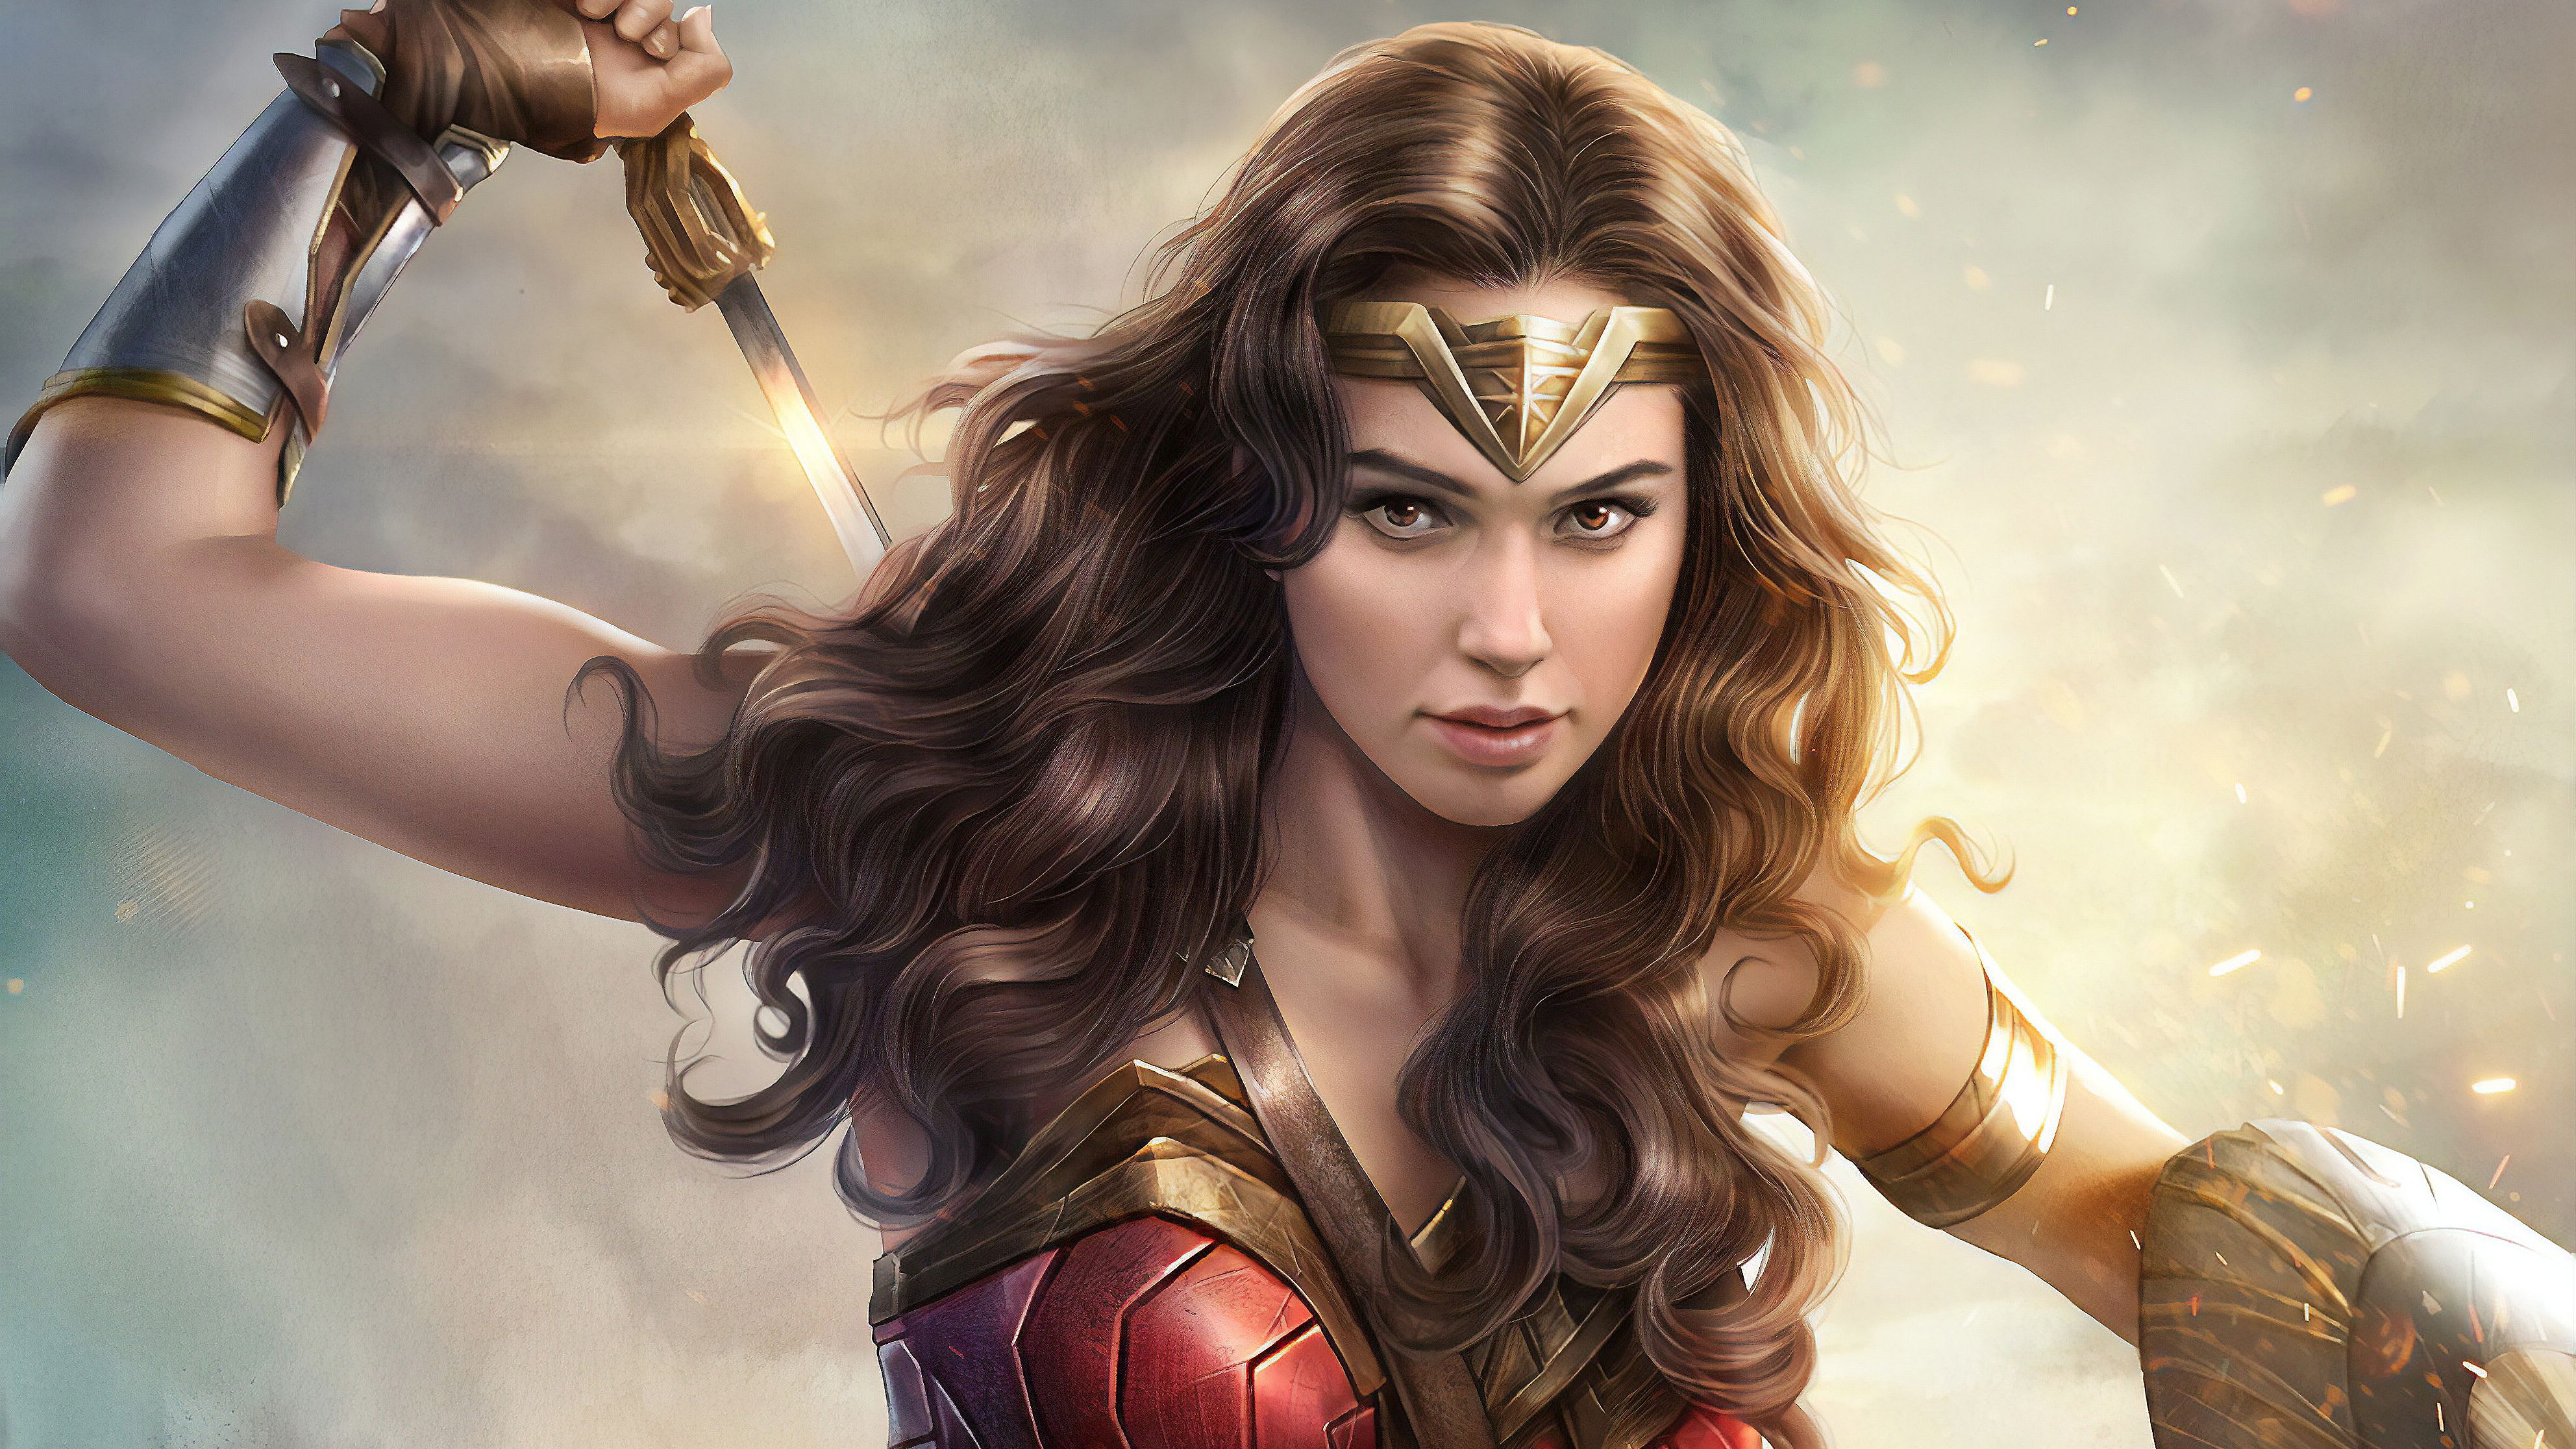 4k Gal Gadot Wonder Woman, HD Superheroes, 4k Wallpaper, Image, Background, Photo and Picture